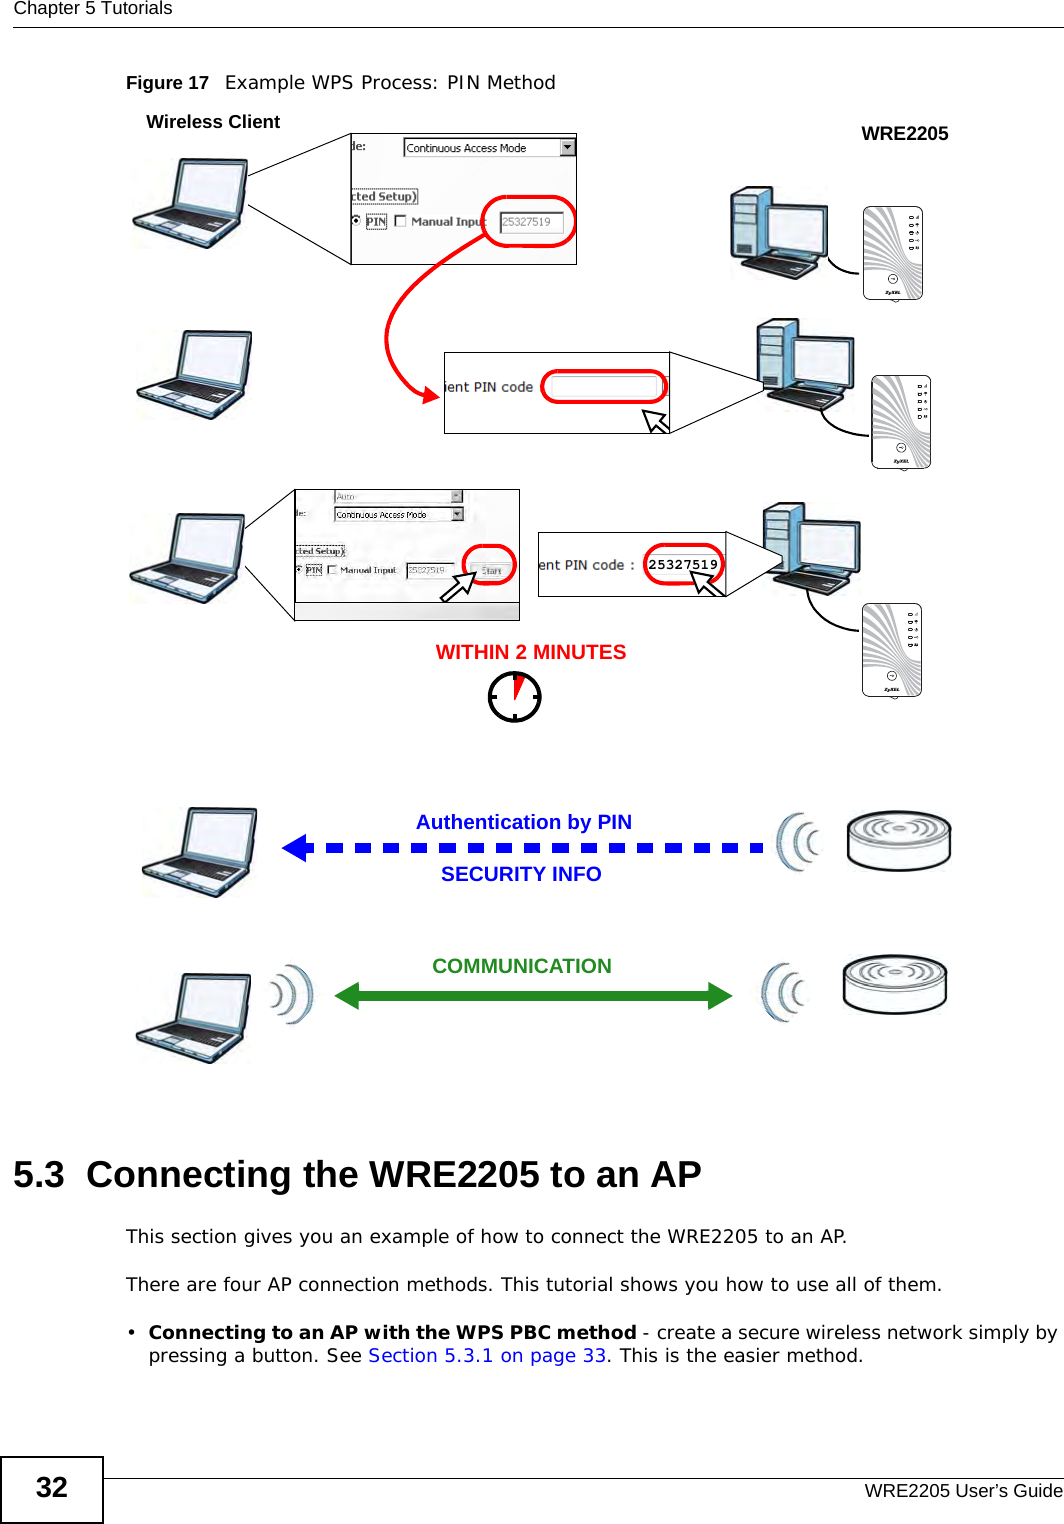 Chapter 5 TutorialsWRE2205 User’s Guide32Figure 17   Example WPS Process: PIN Method5.3  Connecting the WRE2205 to an APThis section gives you an example of how to connect the WRE2205 to an AP.There are four AP connection methods. This tutorial shows you how to use all of them.•Connecting to an AP with the WPS PBC method - create a secure wireless network simply by pressing a button. See Section 5.3.1 on page 33. This is the easier method.Authentication by PINSECURITY INFOWITHIN 2 MINUTESWireless ClientWRE2205COMMUNICATION25327519